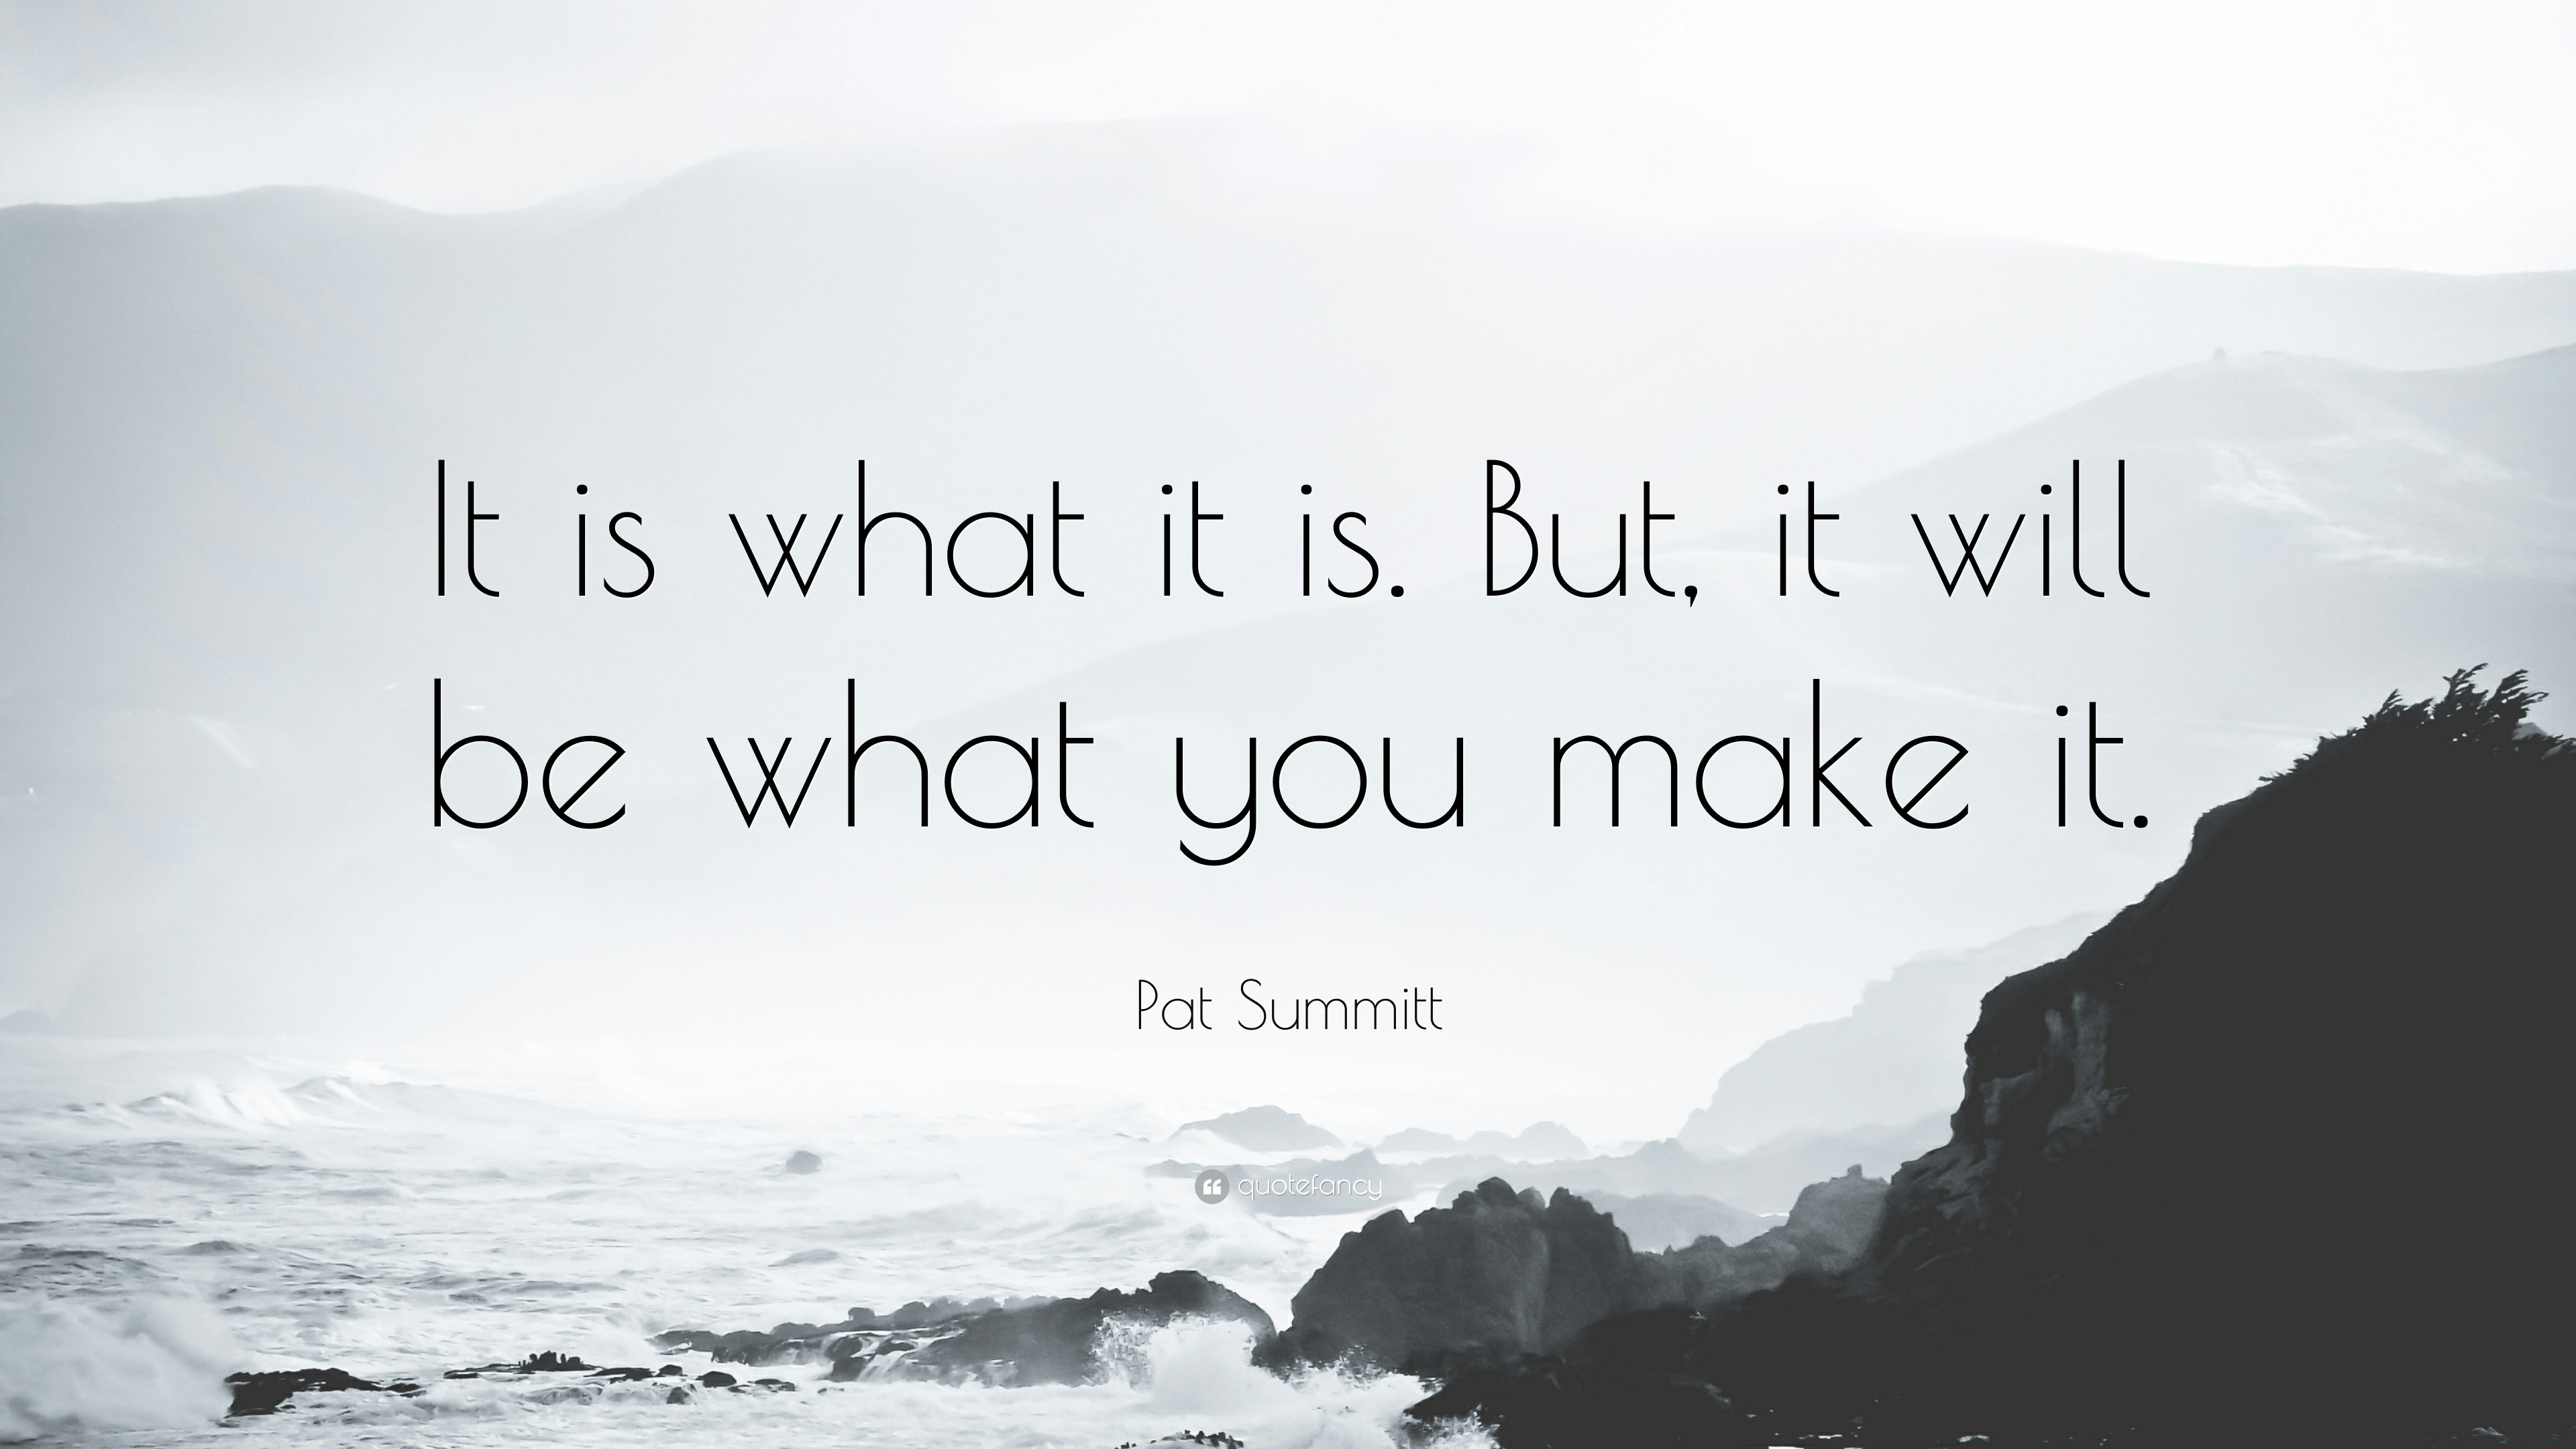 Pat Summitt Quote: “It is what it is. But, it will be what you make it.”